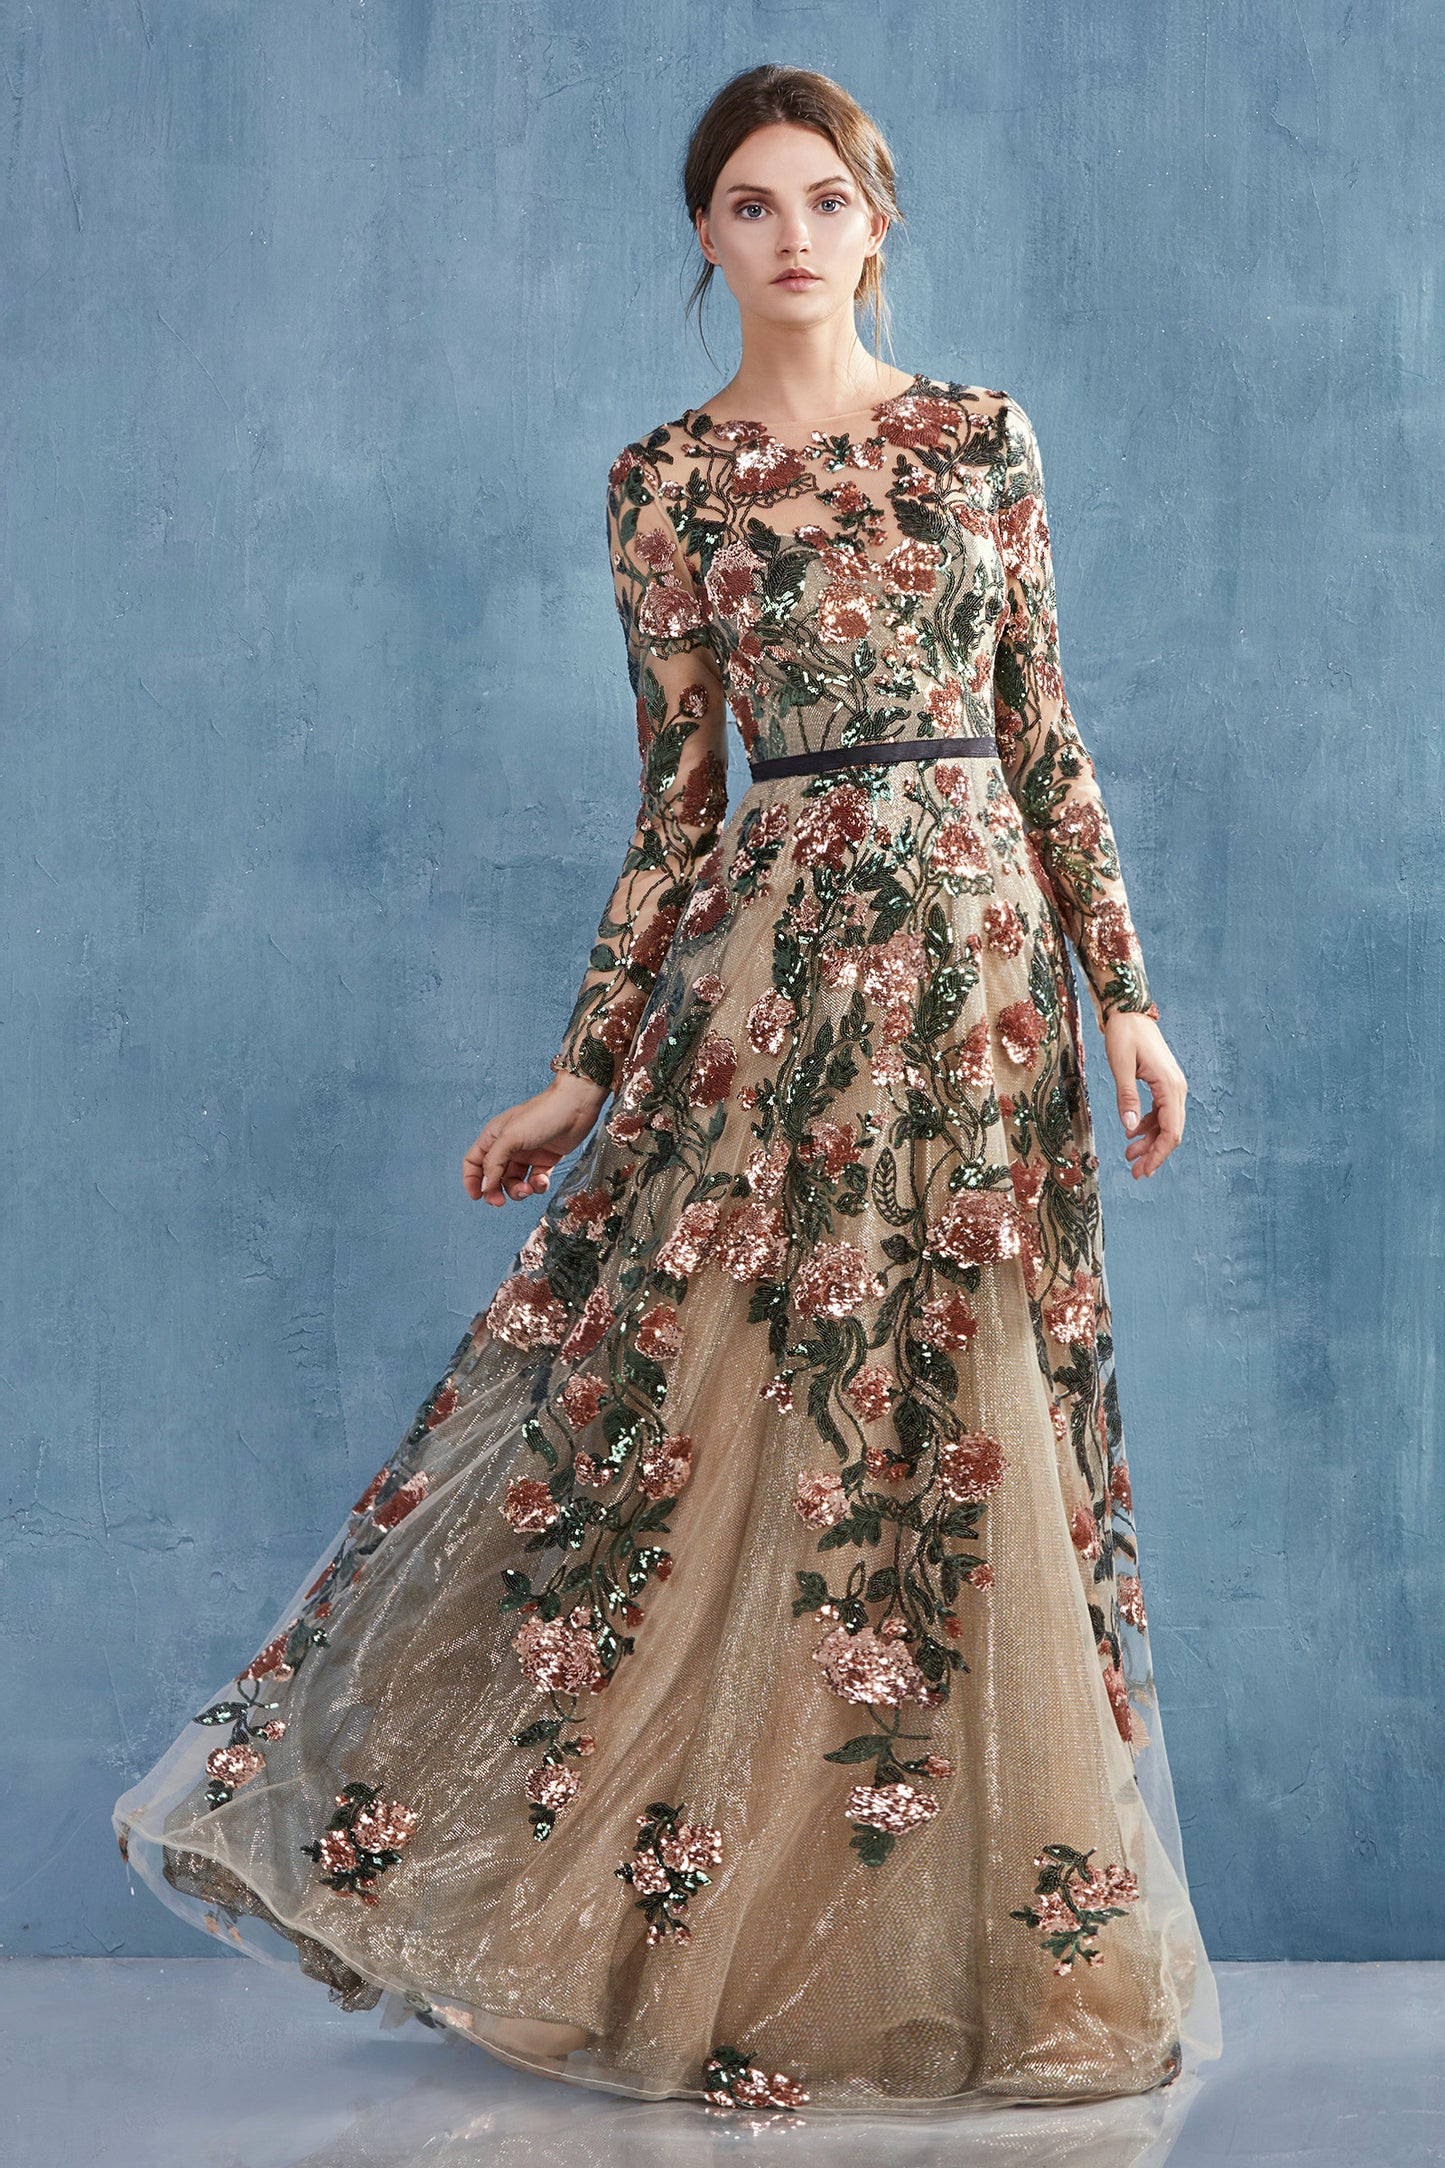 Savannah Gown features copper floral sequin motif that flows through the dress over metallic gold underlay. Ideal for ladies who is looking for fashionable long sleeve option, this gown provides coverage with sweetheart lining bodice then flares to soft A